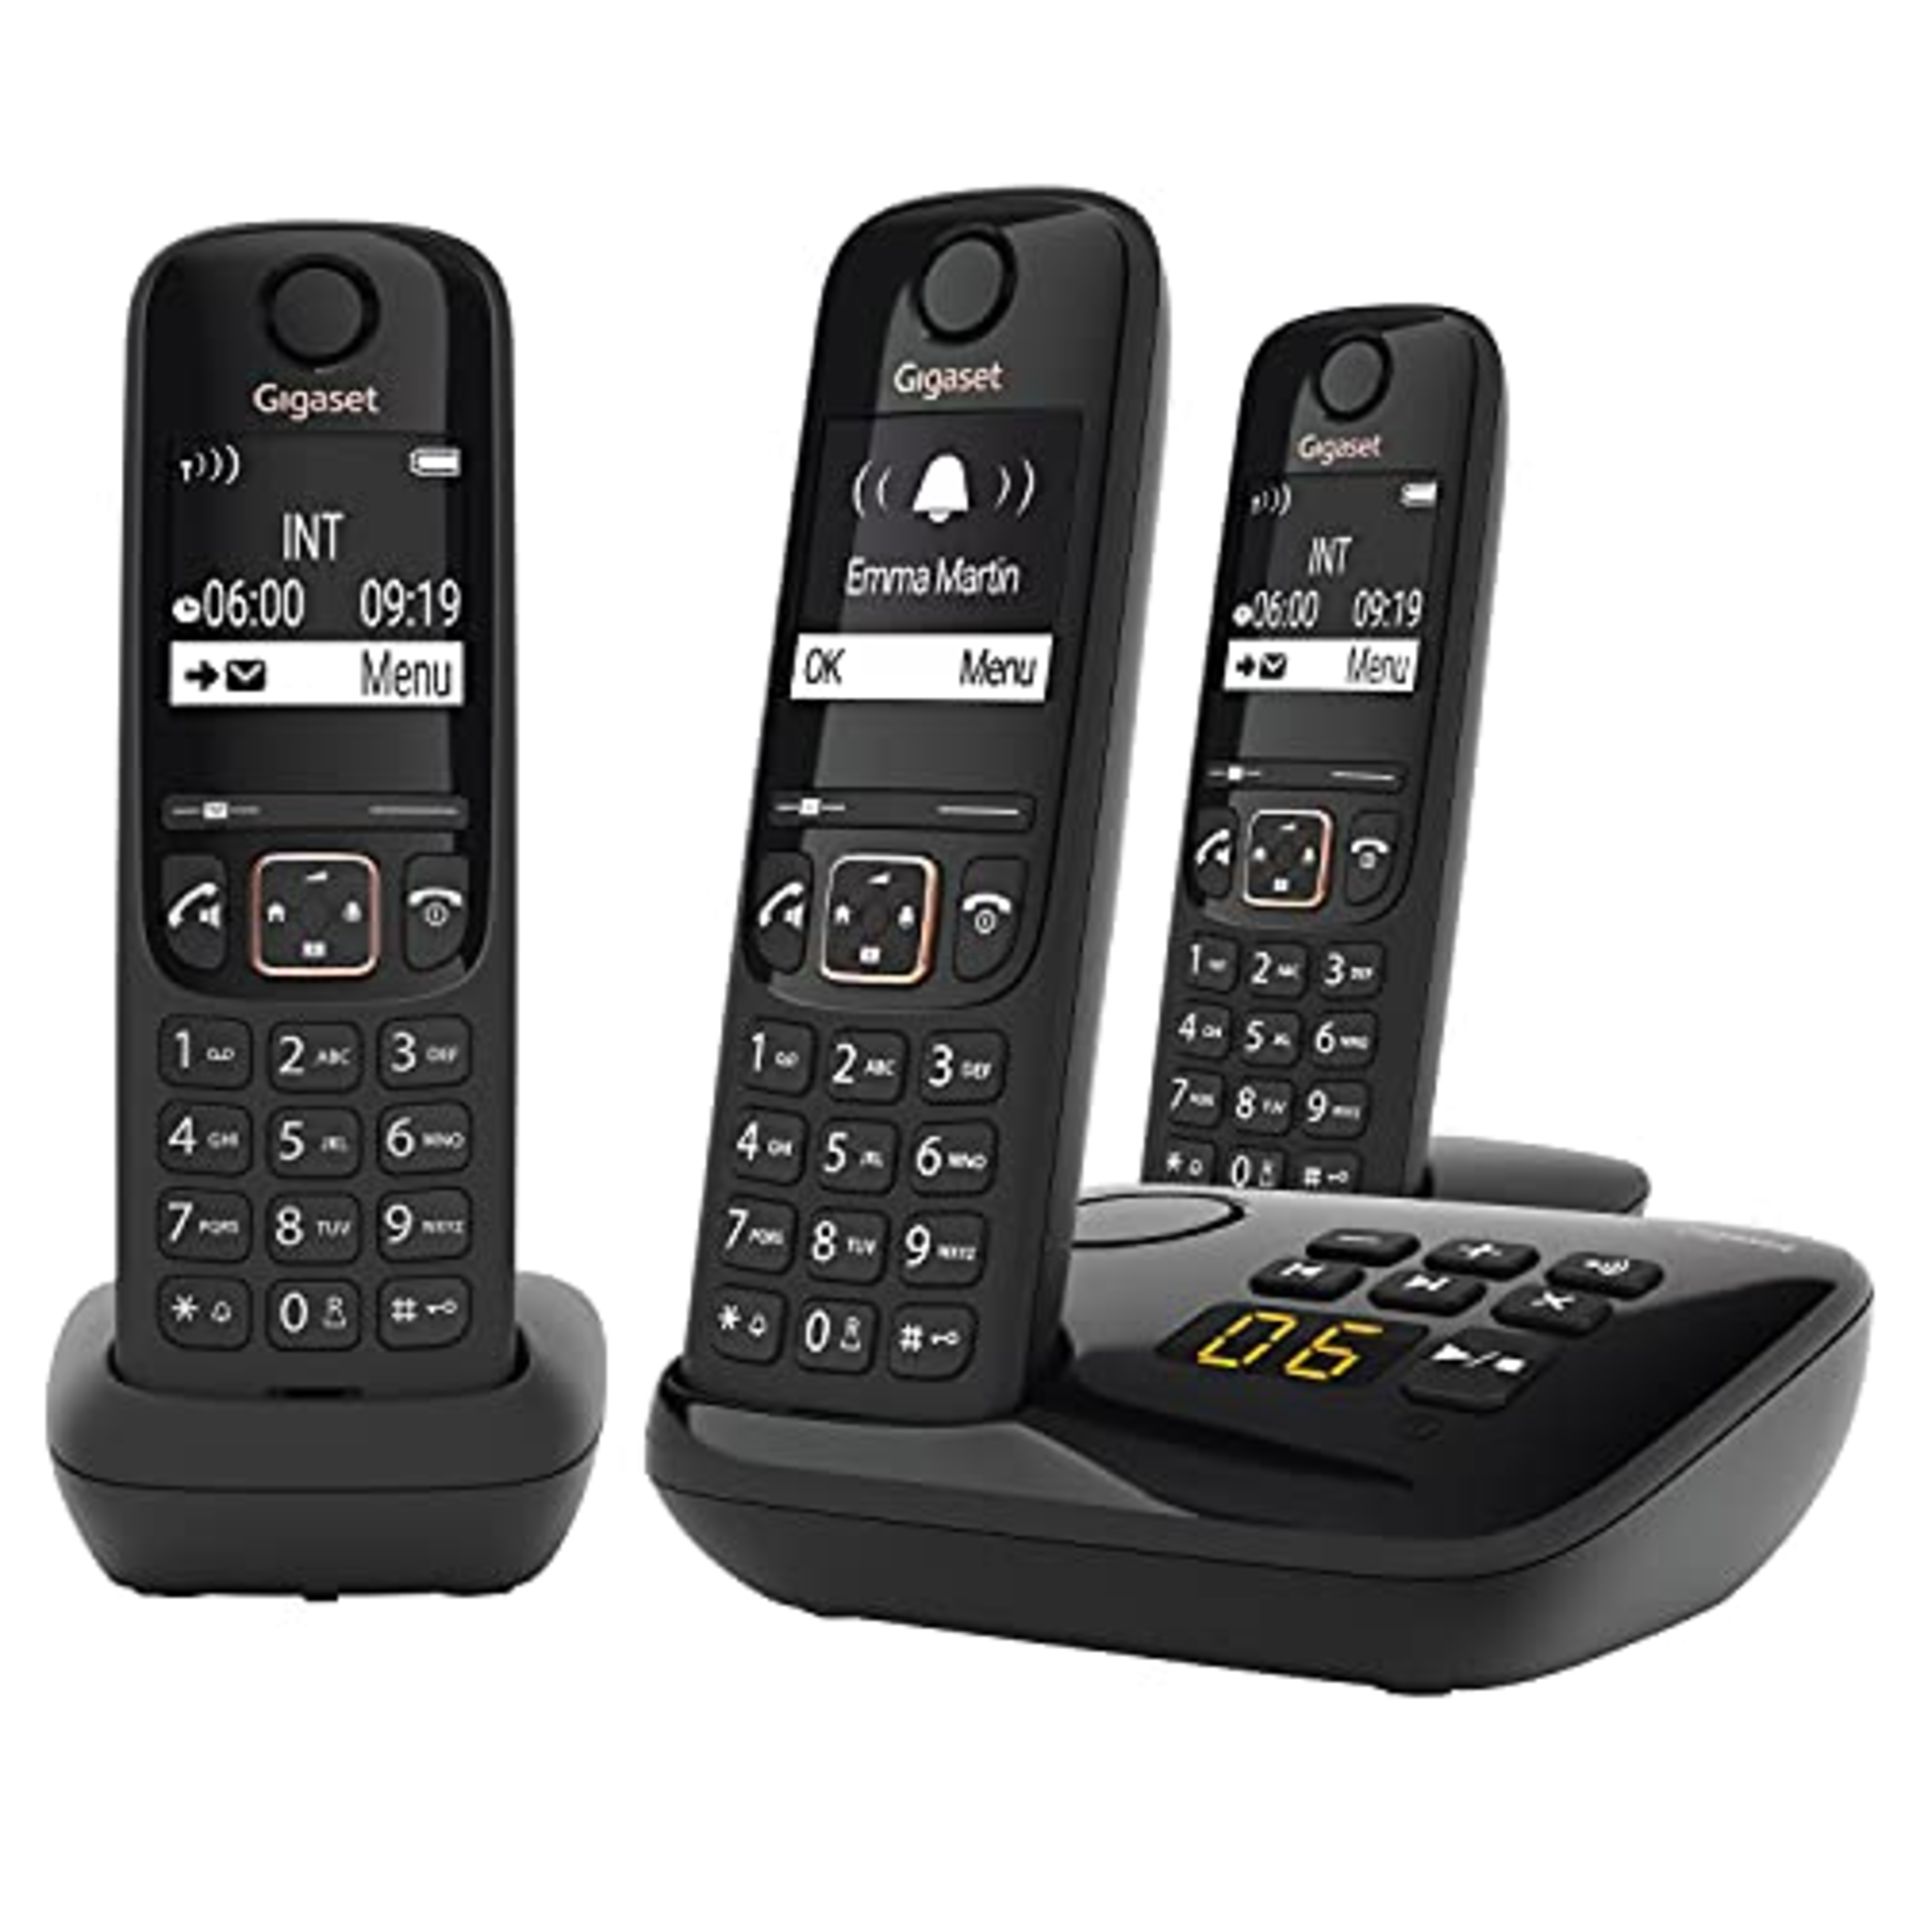 Gigaset AS690 - Cordless DECT Telephone - large, high-contrast display - brilliant aud